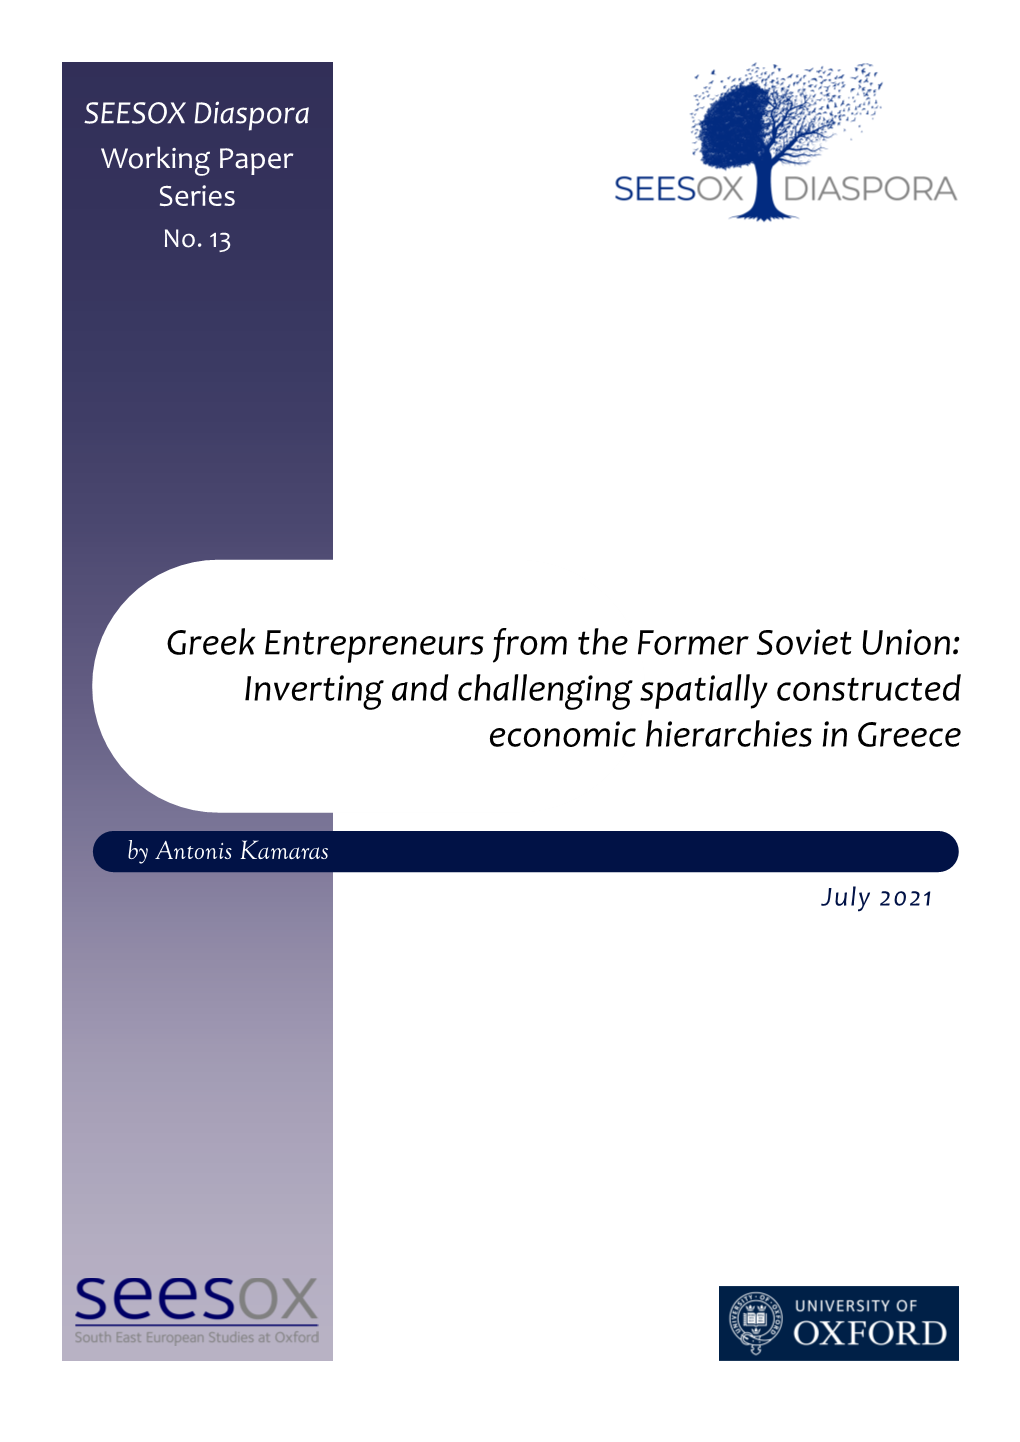 Greek Entrepreneurs from the Former Soviet Union: Inverting and Challenging Spatially Constructed Economic Hierarchies in Greece